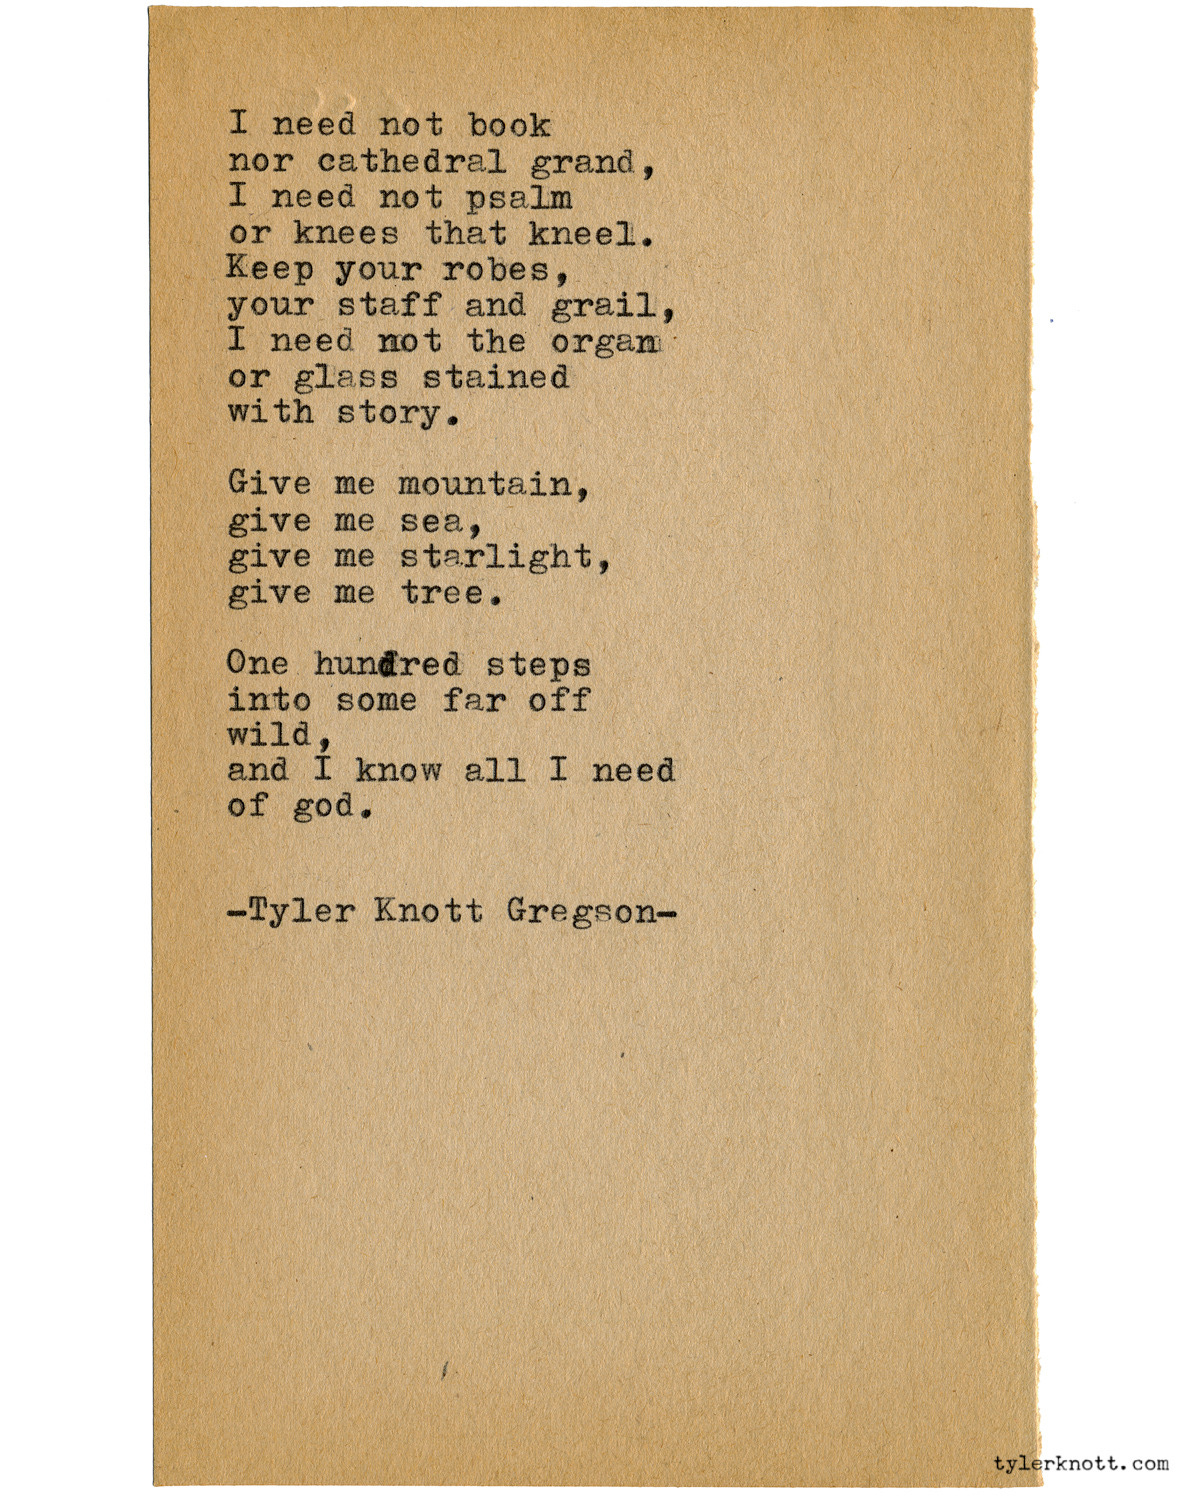 Typewriter Series #2806 by Tyler Knott Gregson
*Chasers of the Light Podcast is still goin’ strong! Click the linkthing in my bio or search Chasers of the Light Podcast on Spotify or iTunes and subscribe! I’ll love you for-ev-er.*
I need not book
nor...